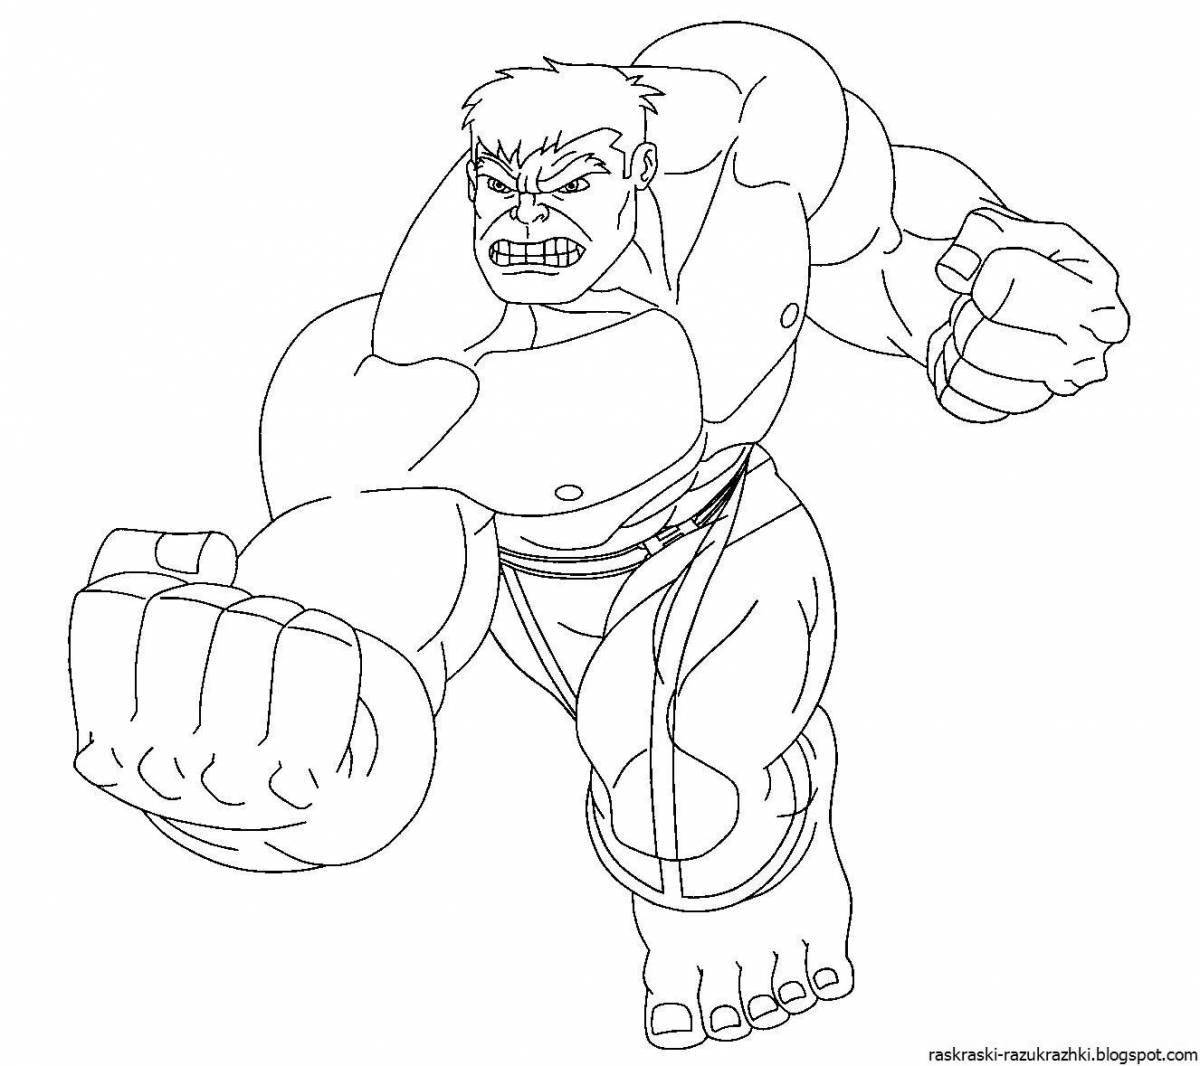 Coloring bright hulk for children 6-7 years old